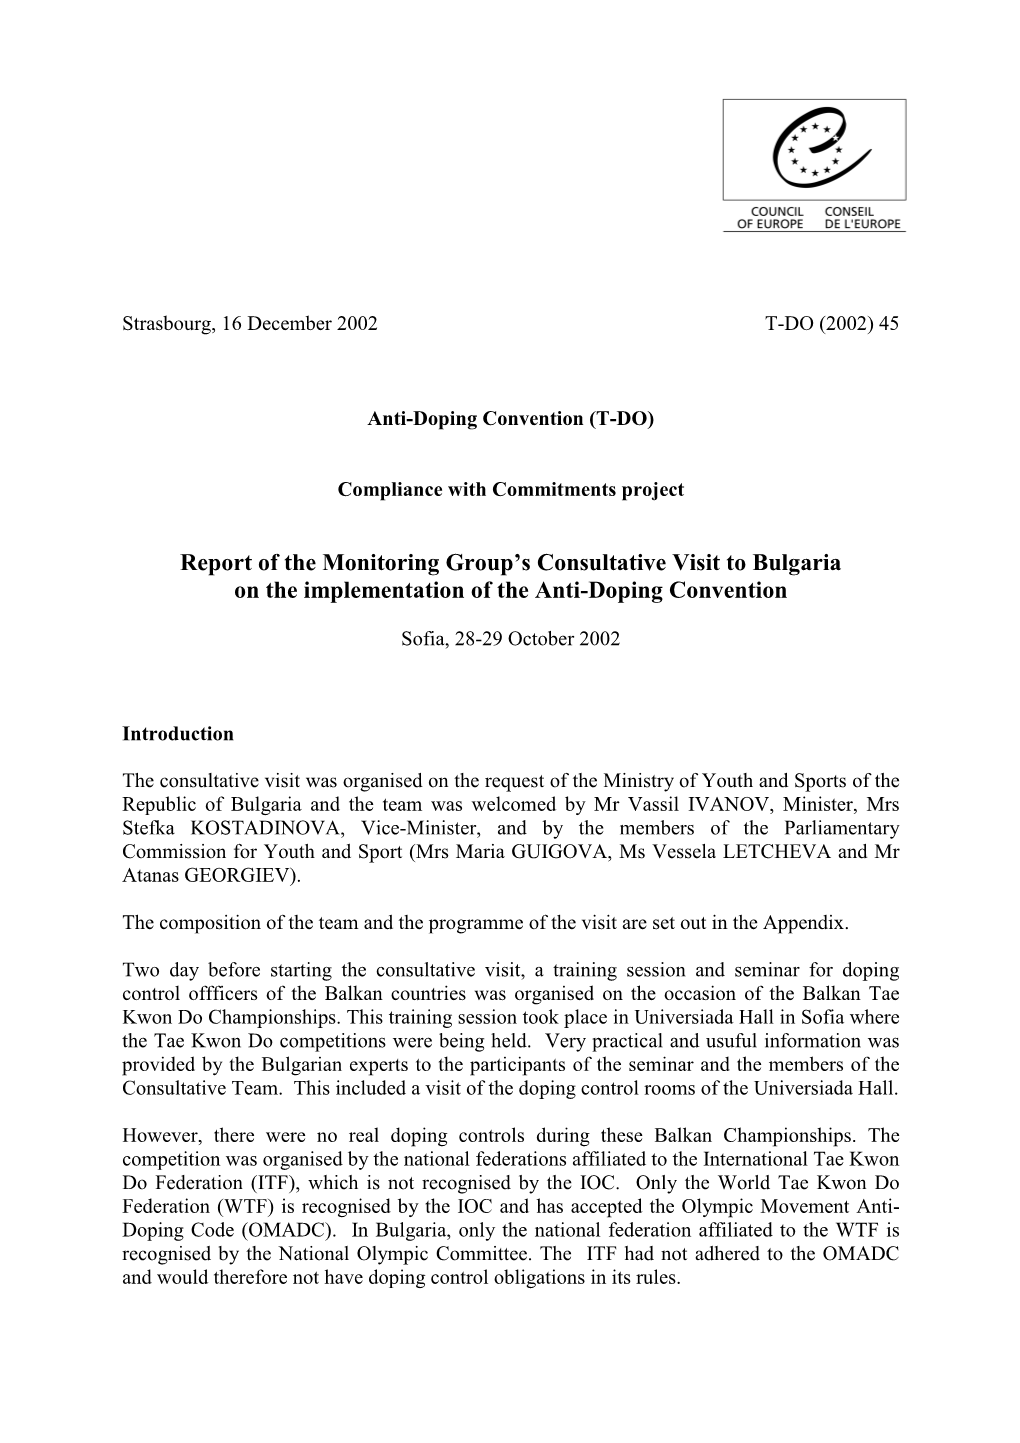 Report of the Monitoring Group's Consultative Visit to Bulgaria on the Implementation of the Anti-Doping Convention